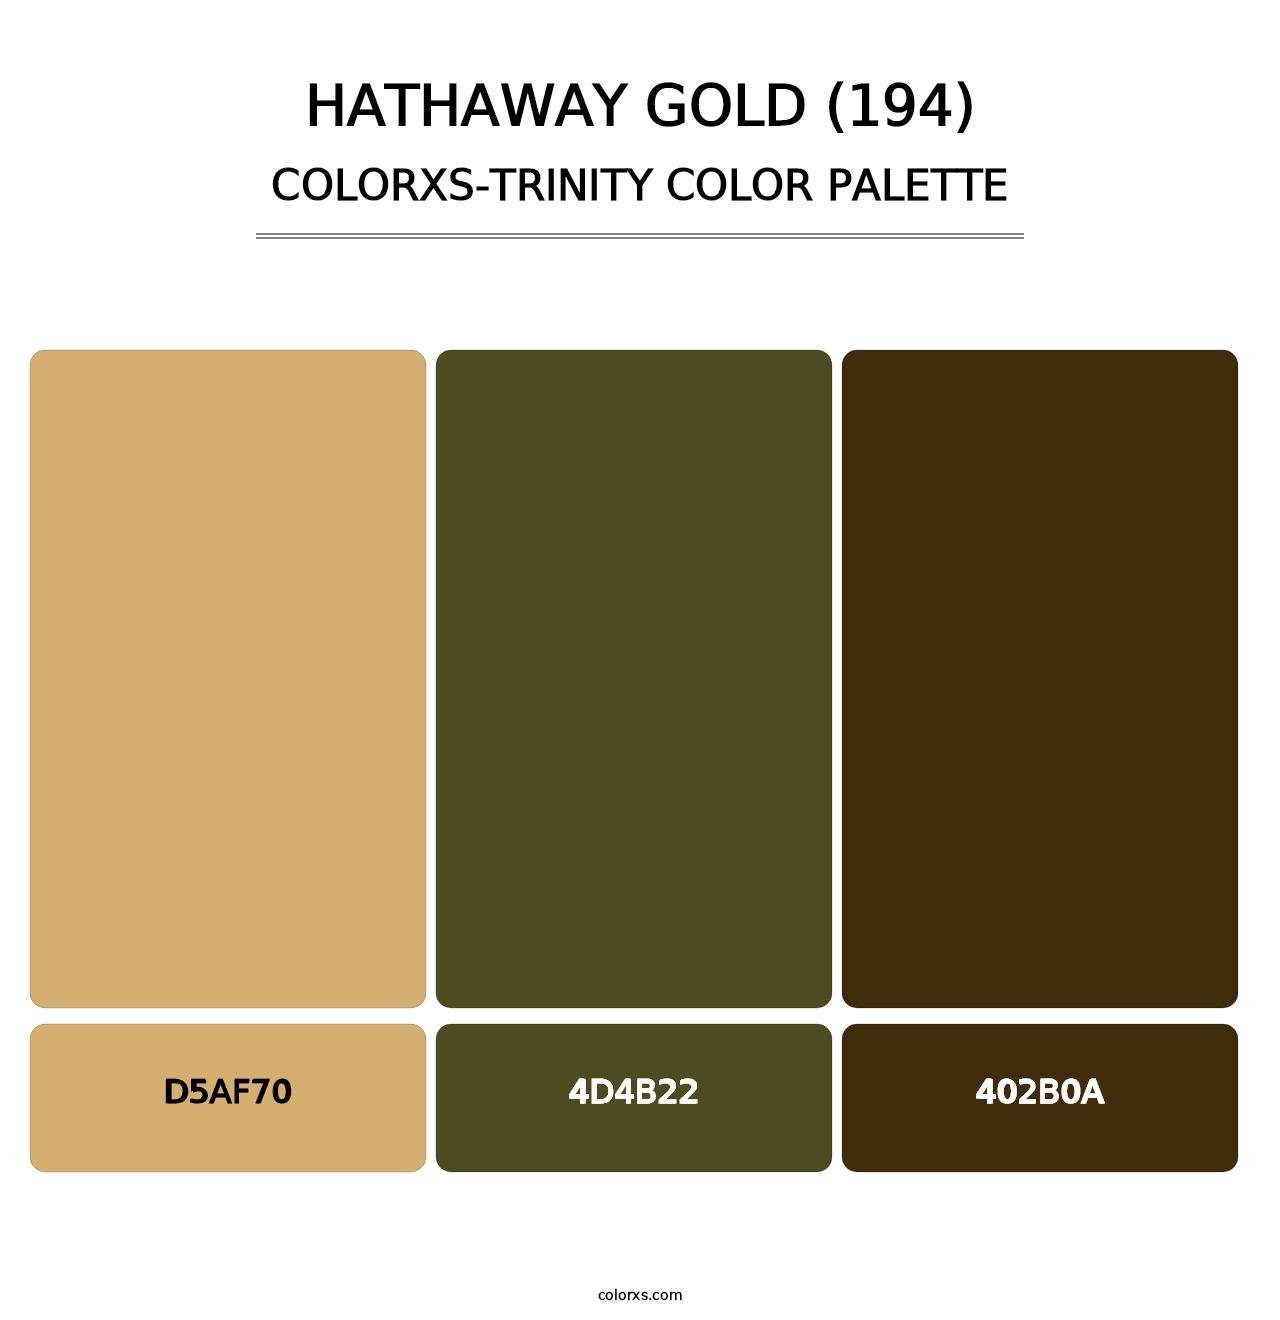 Hathaway Gold (194) - Colorxs Trinity Palette